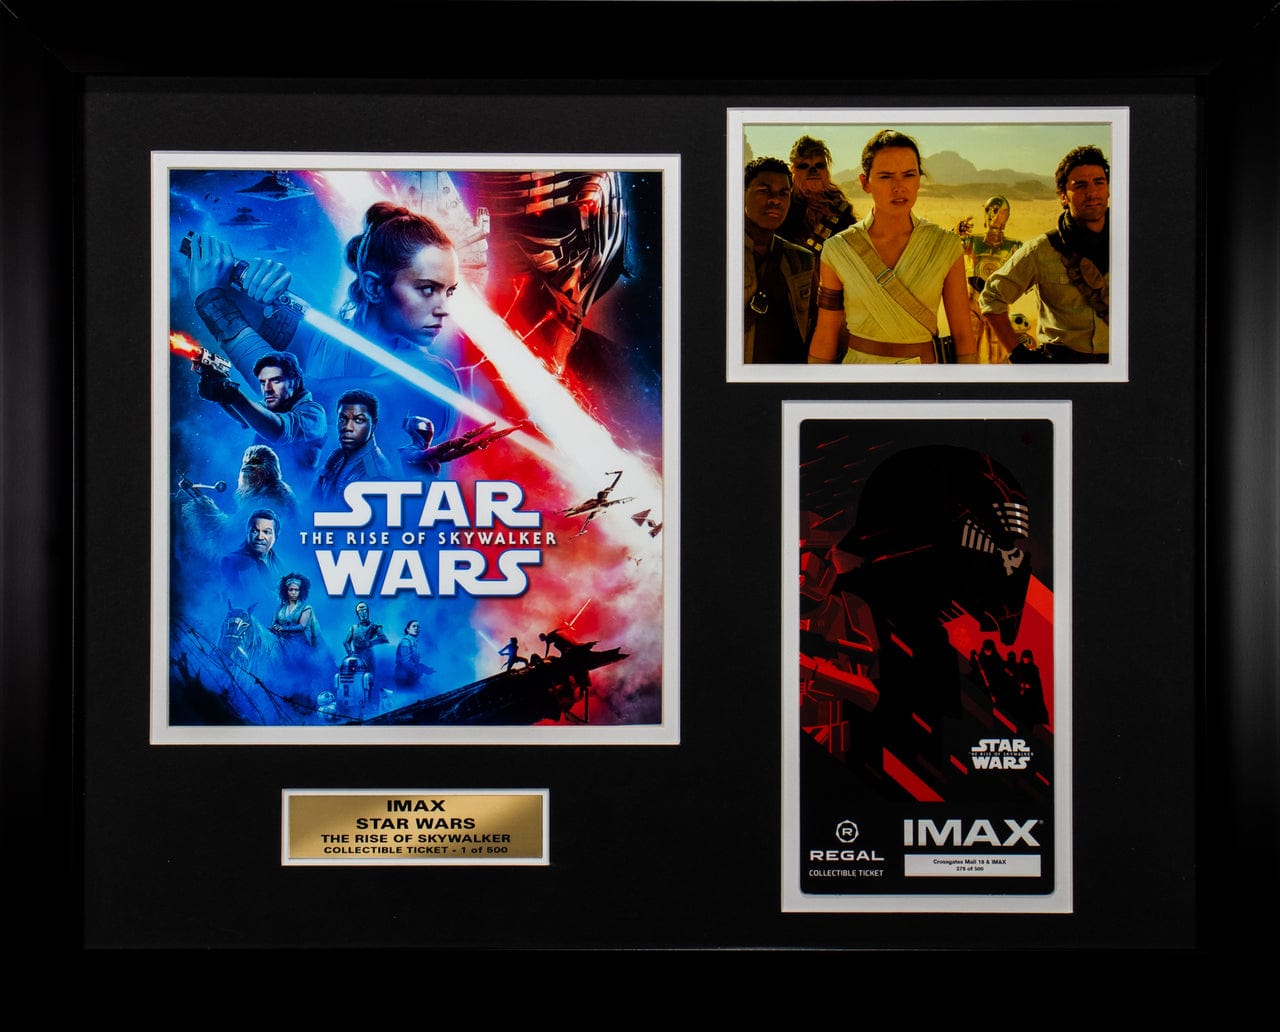 STAR WARS Collectible: The Rise of Skywalker IMAX Ticket (view one)